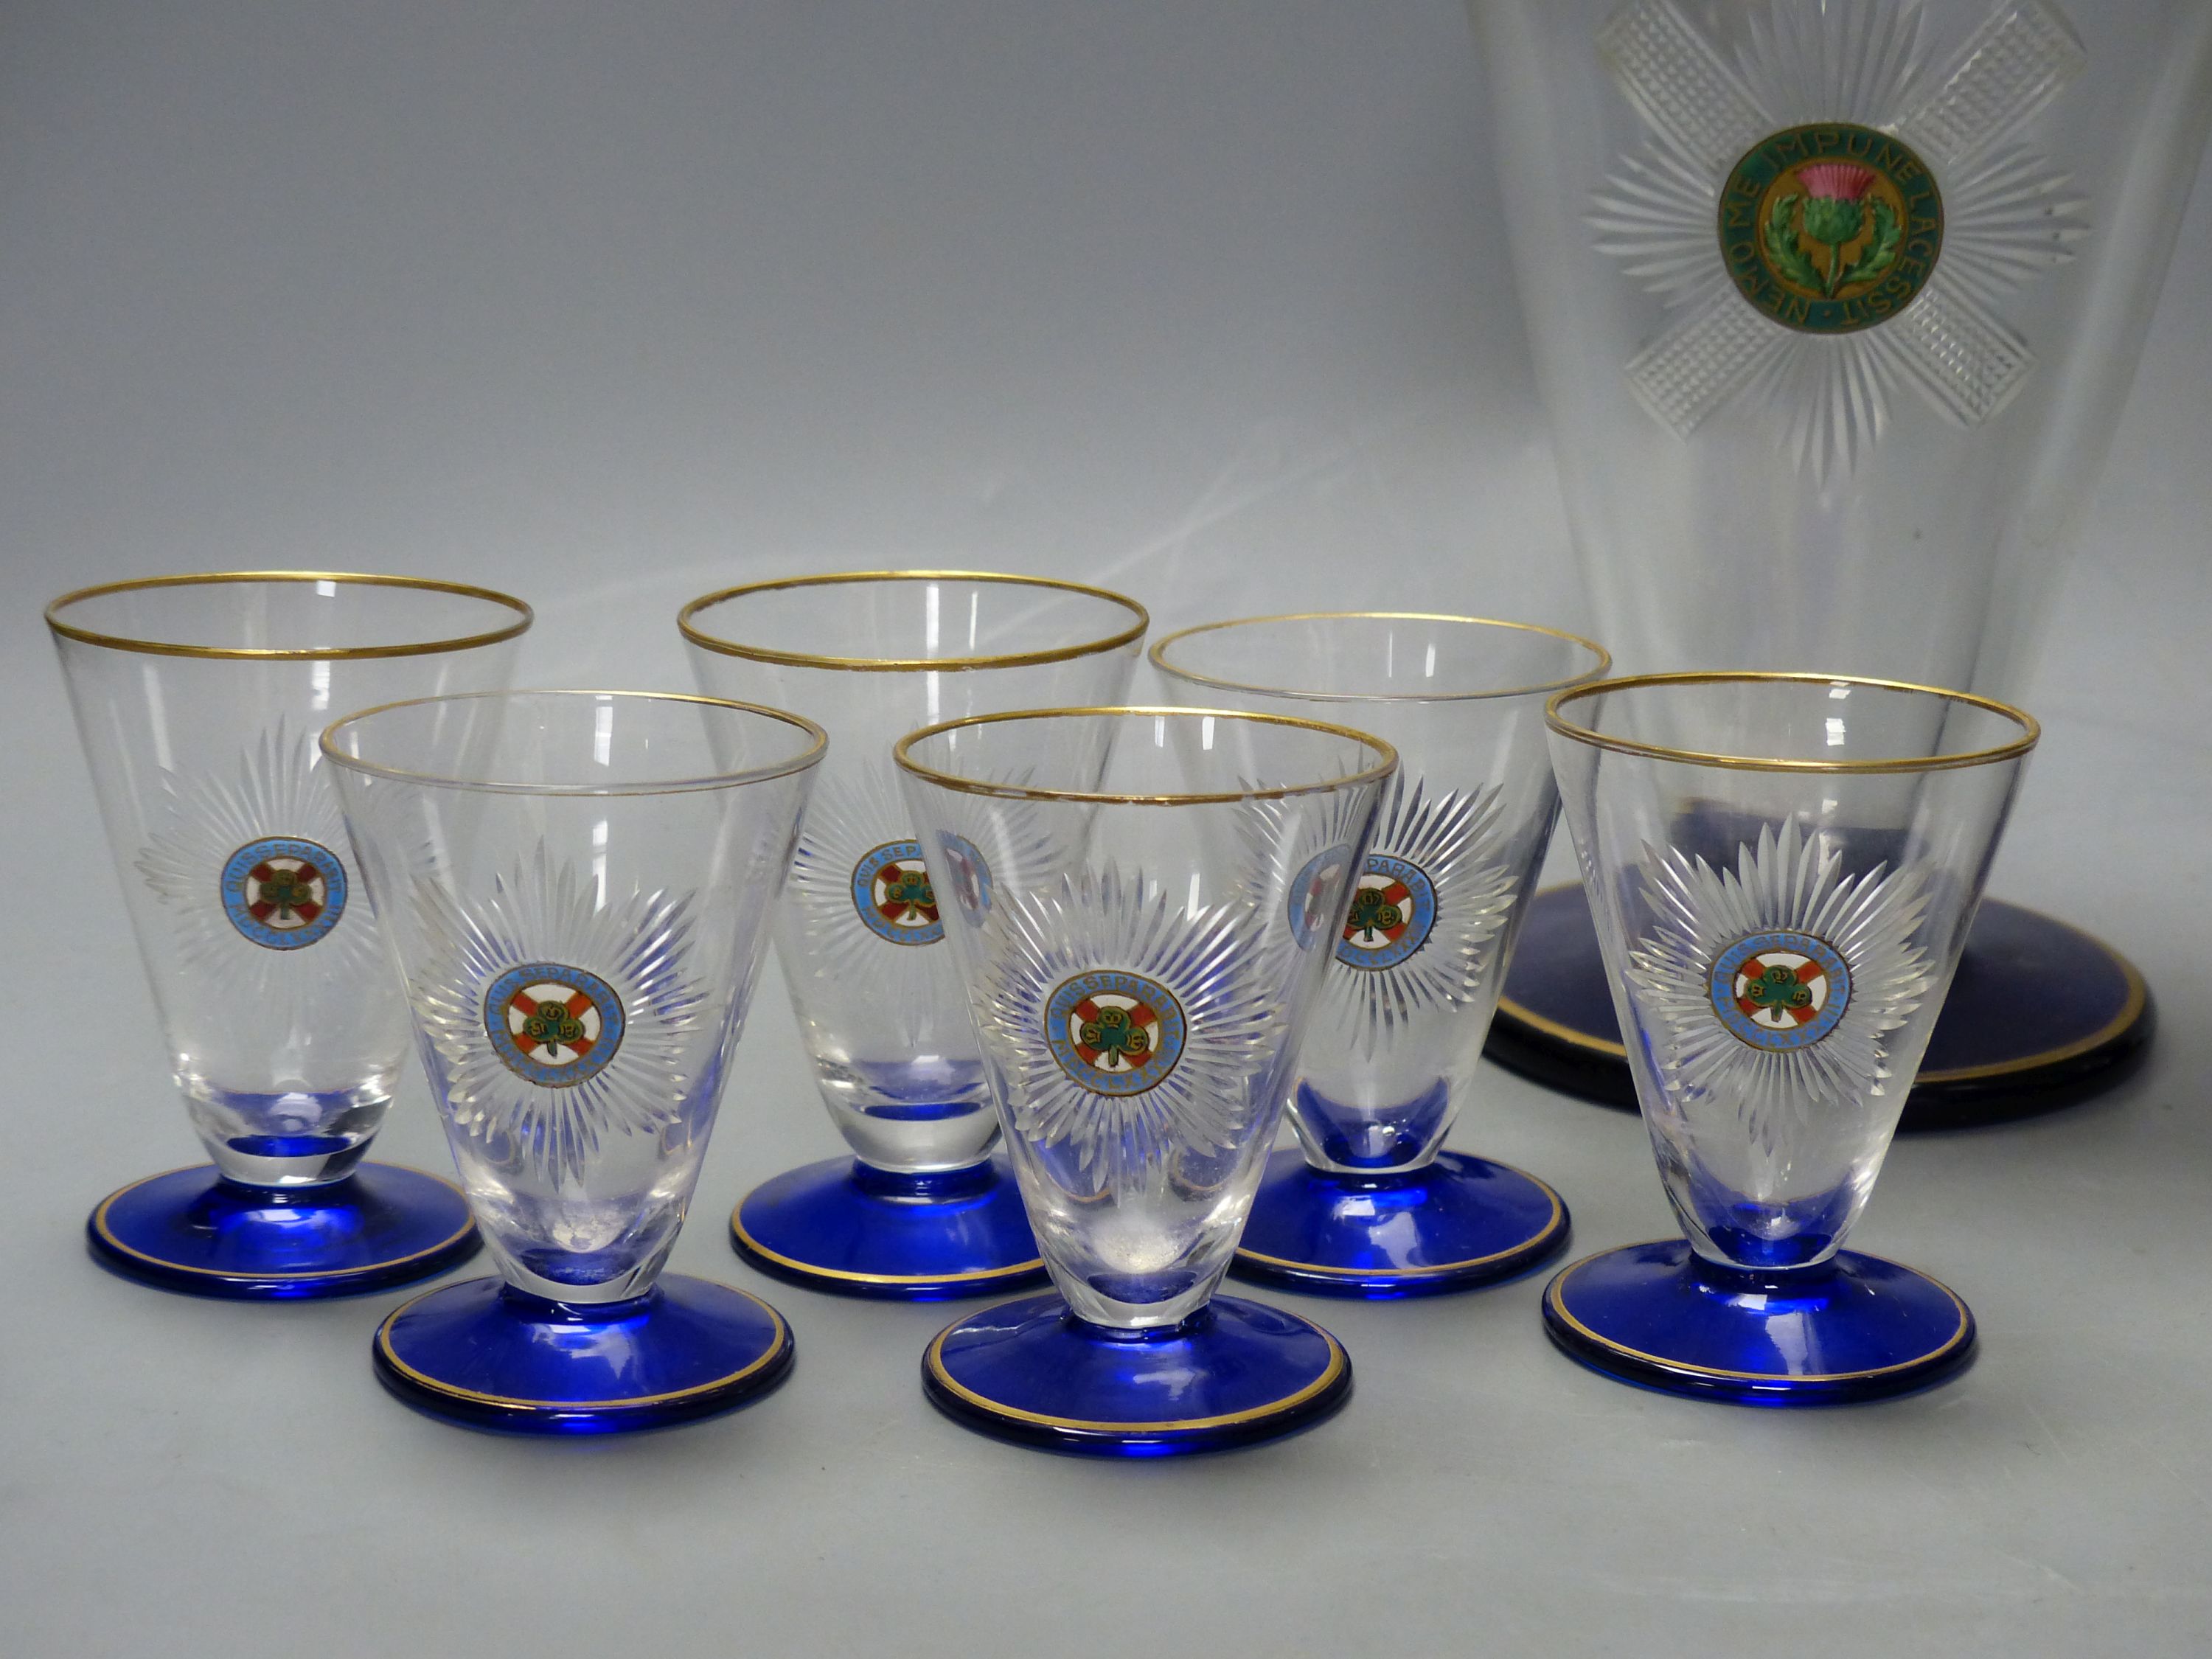 A pair of Art Deco cobalt blue and gilt-mounted tapered glass cocktail shakers, c.1920, enamelled with Black Watch and 4th Royal Irish Dragoon Guards mottos and six matching glasses